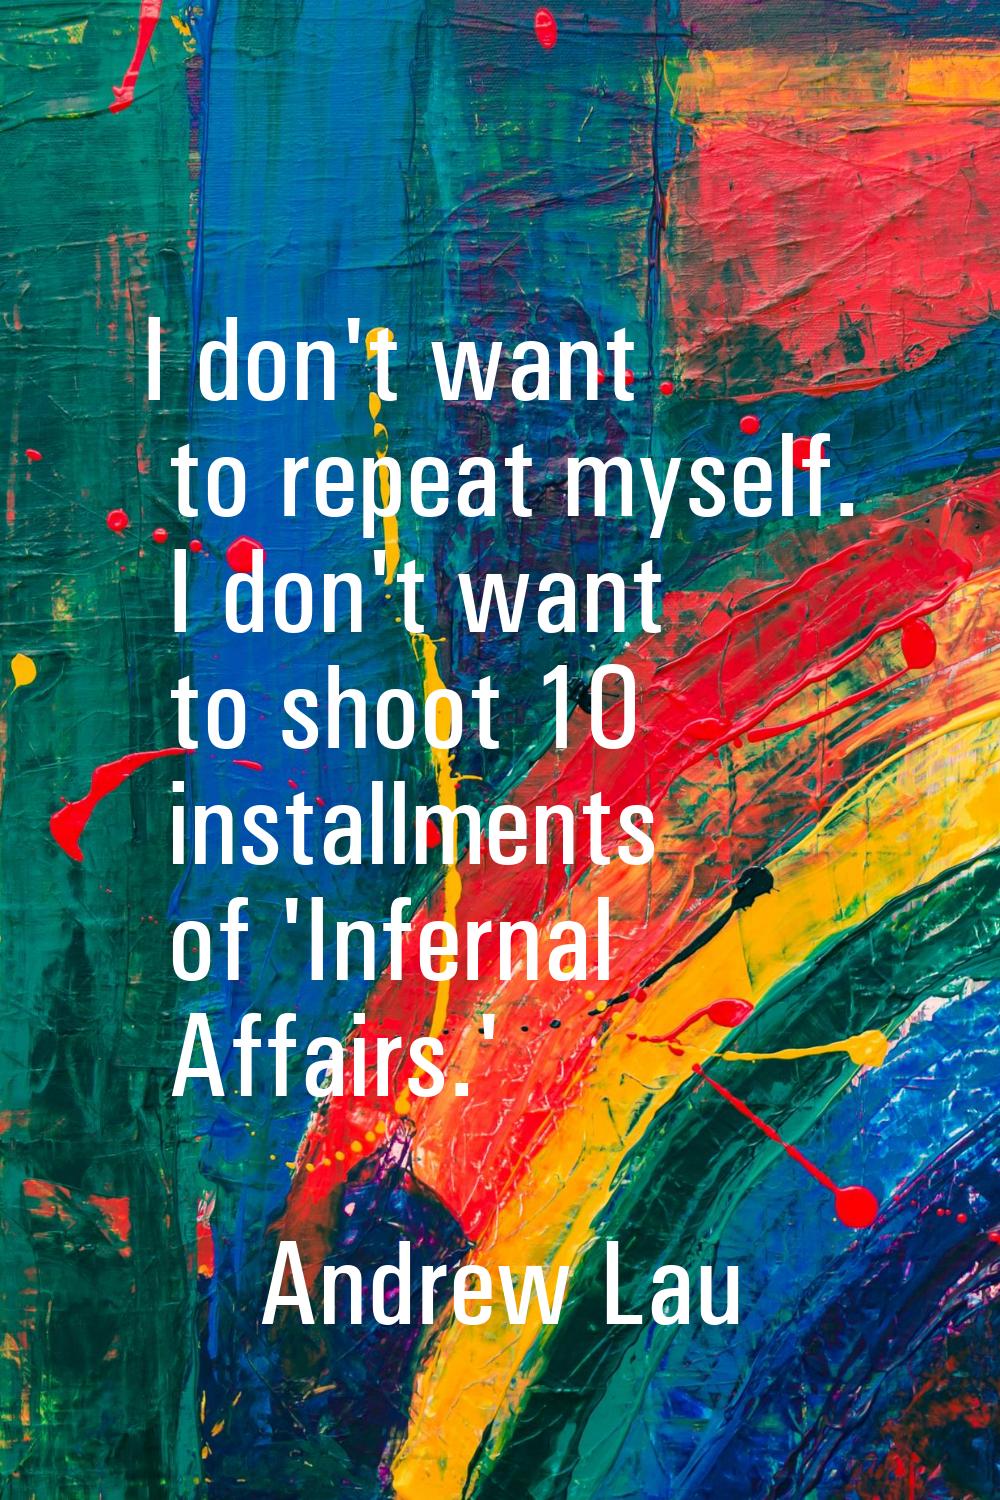 I don't want to repeat myself. I don't want to shoot 10 installments of 'Infernal Affairs.'